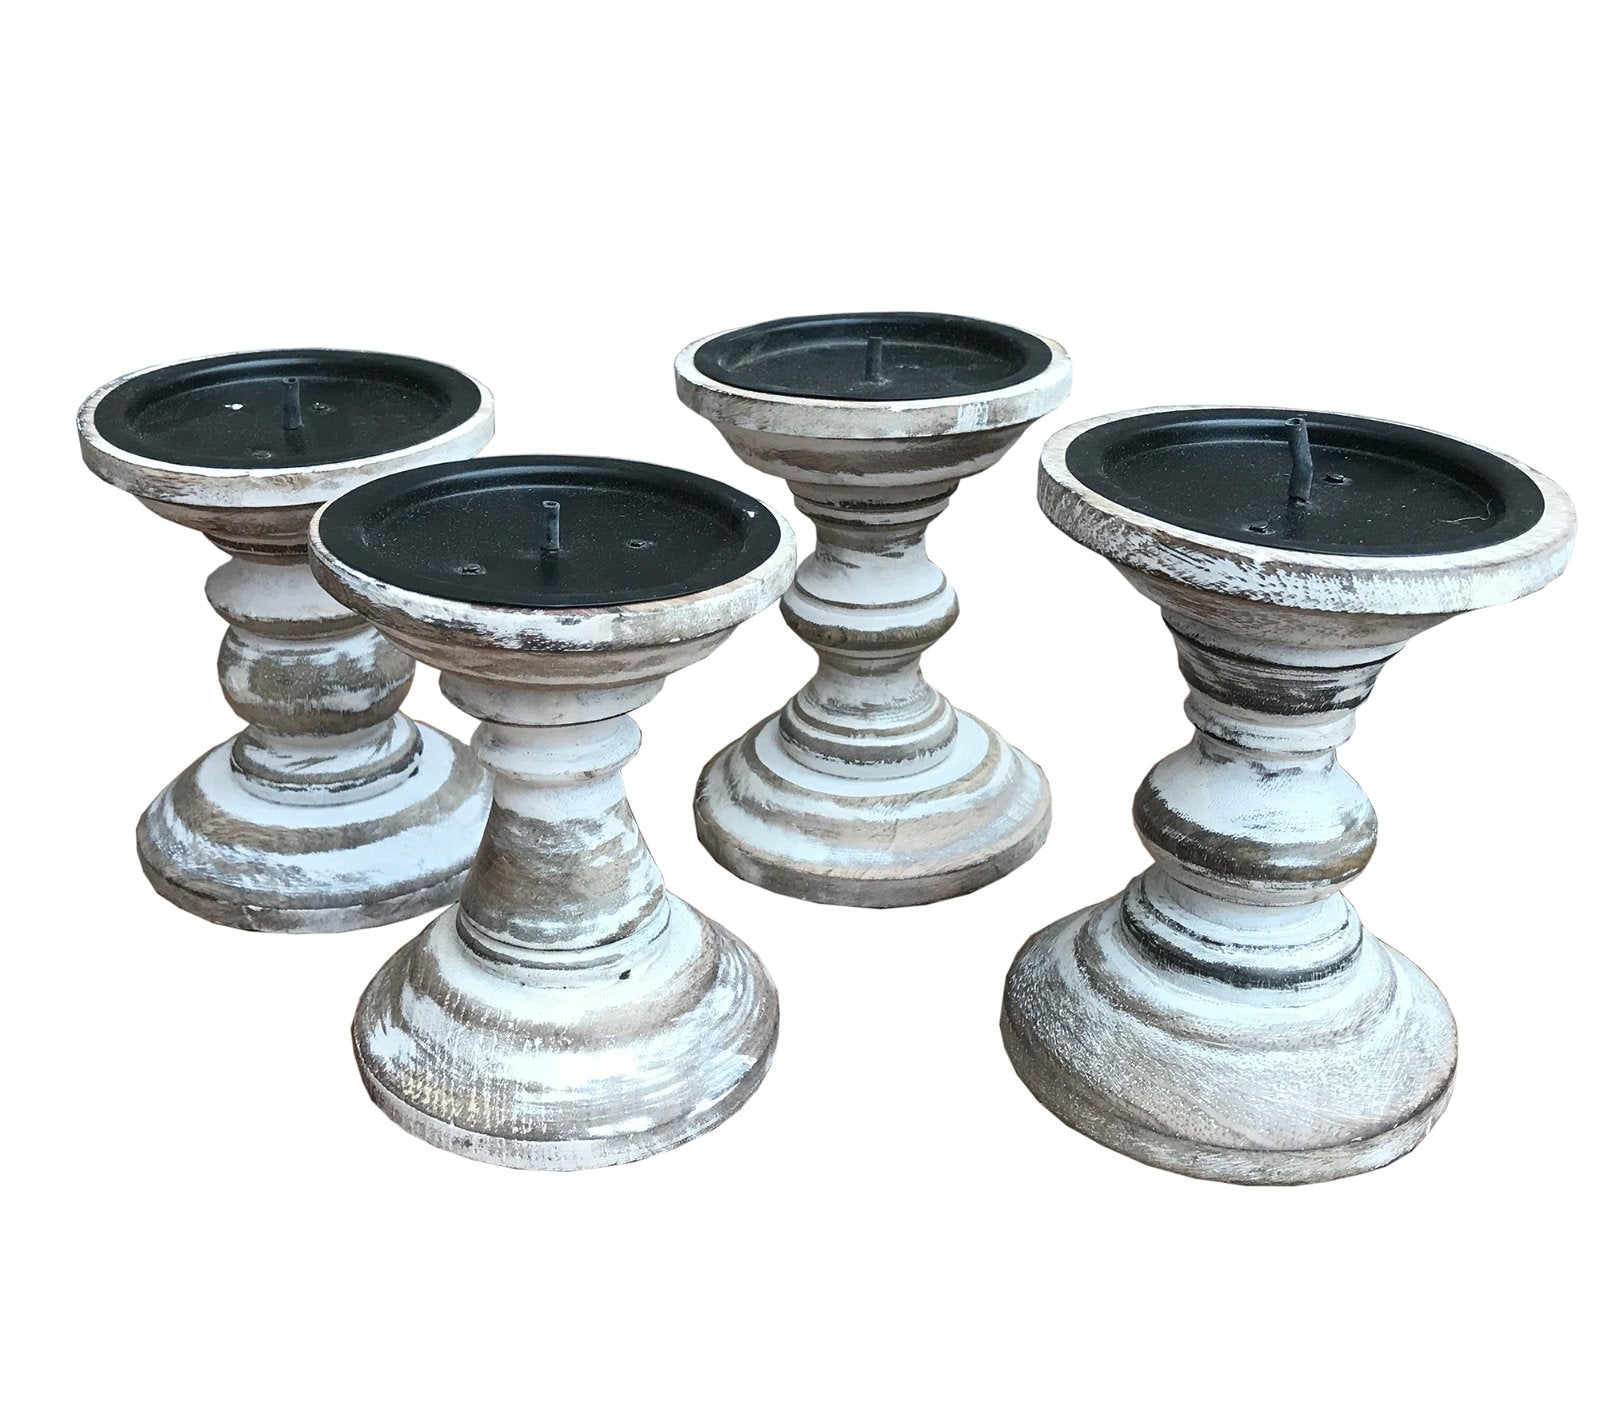 Set of 4 White Wooden Candlestick Church Pillar Candle Holders - a Cheeky Plant